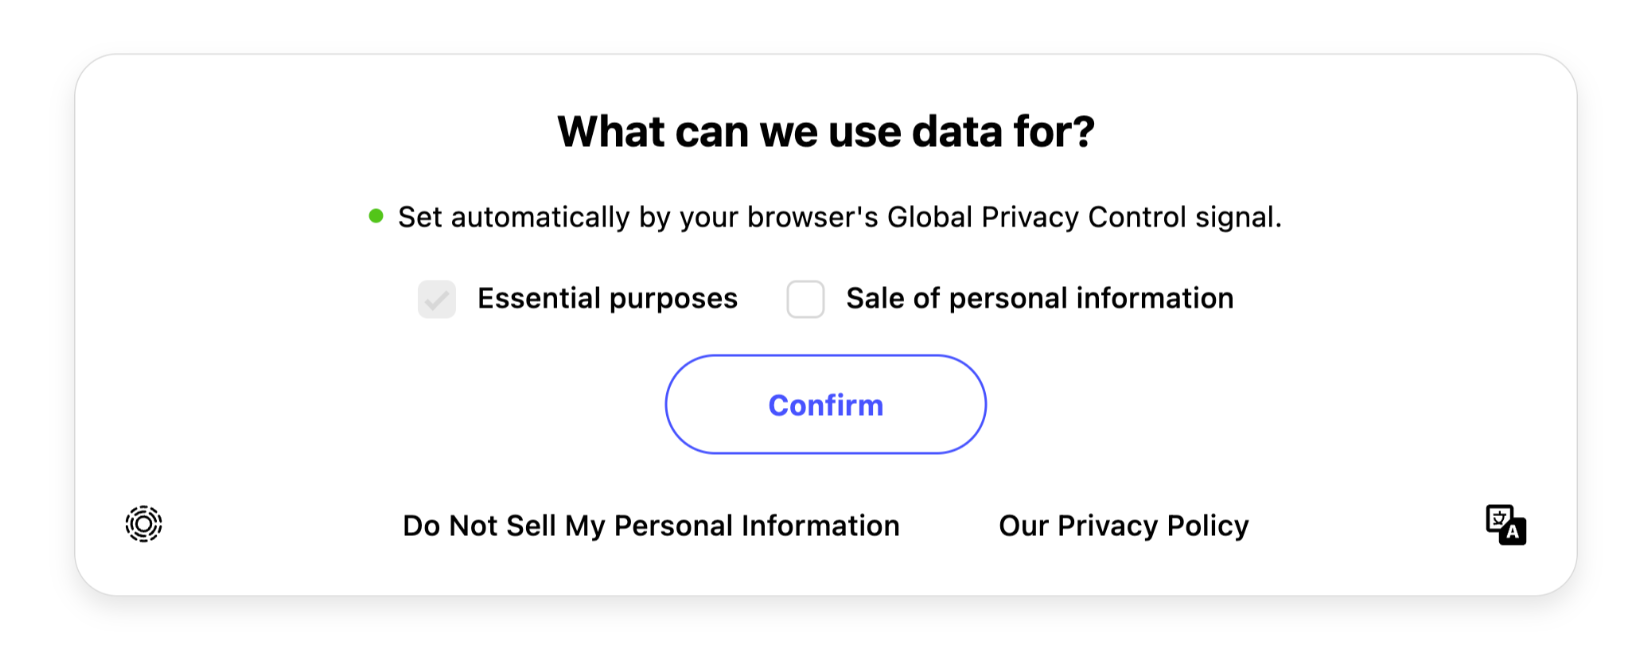 Transcend Consent Management, showing the detection of the Global Privacy Control